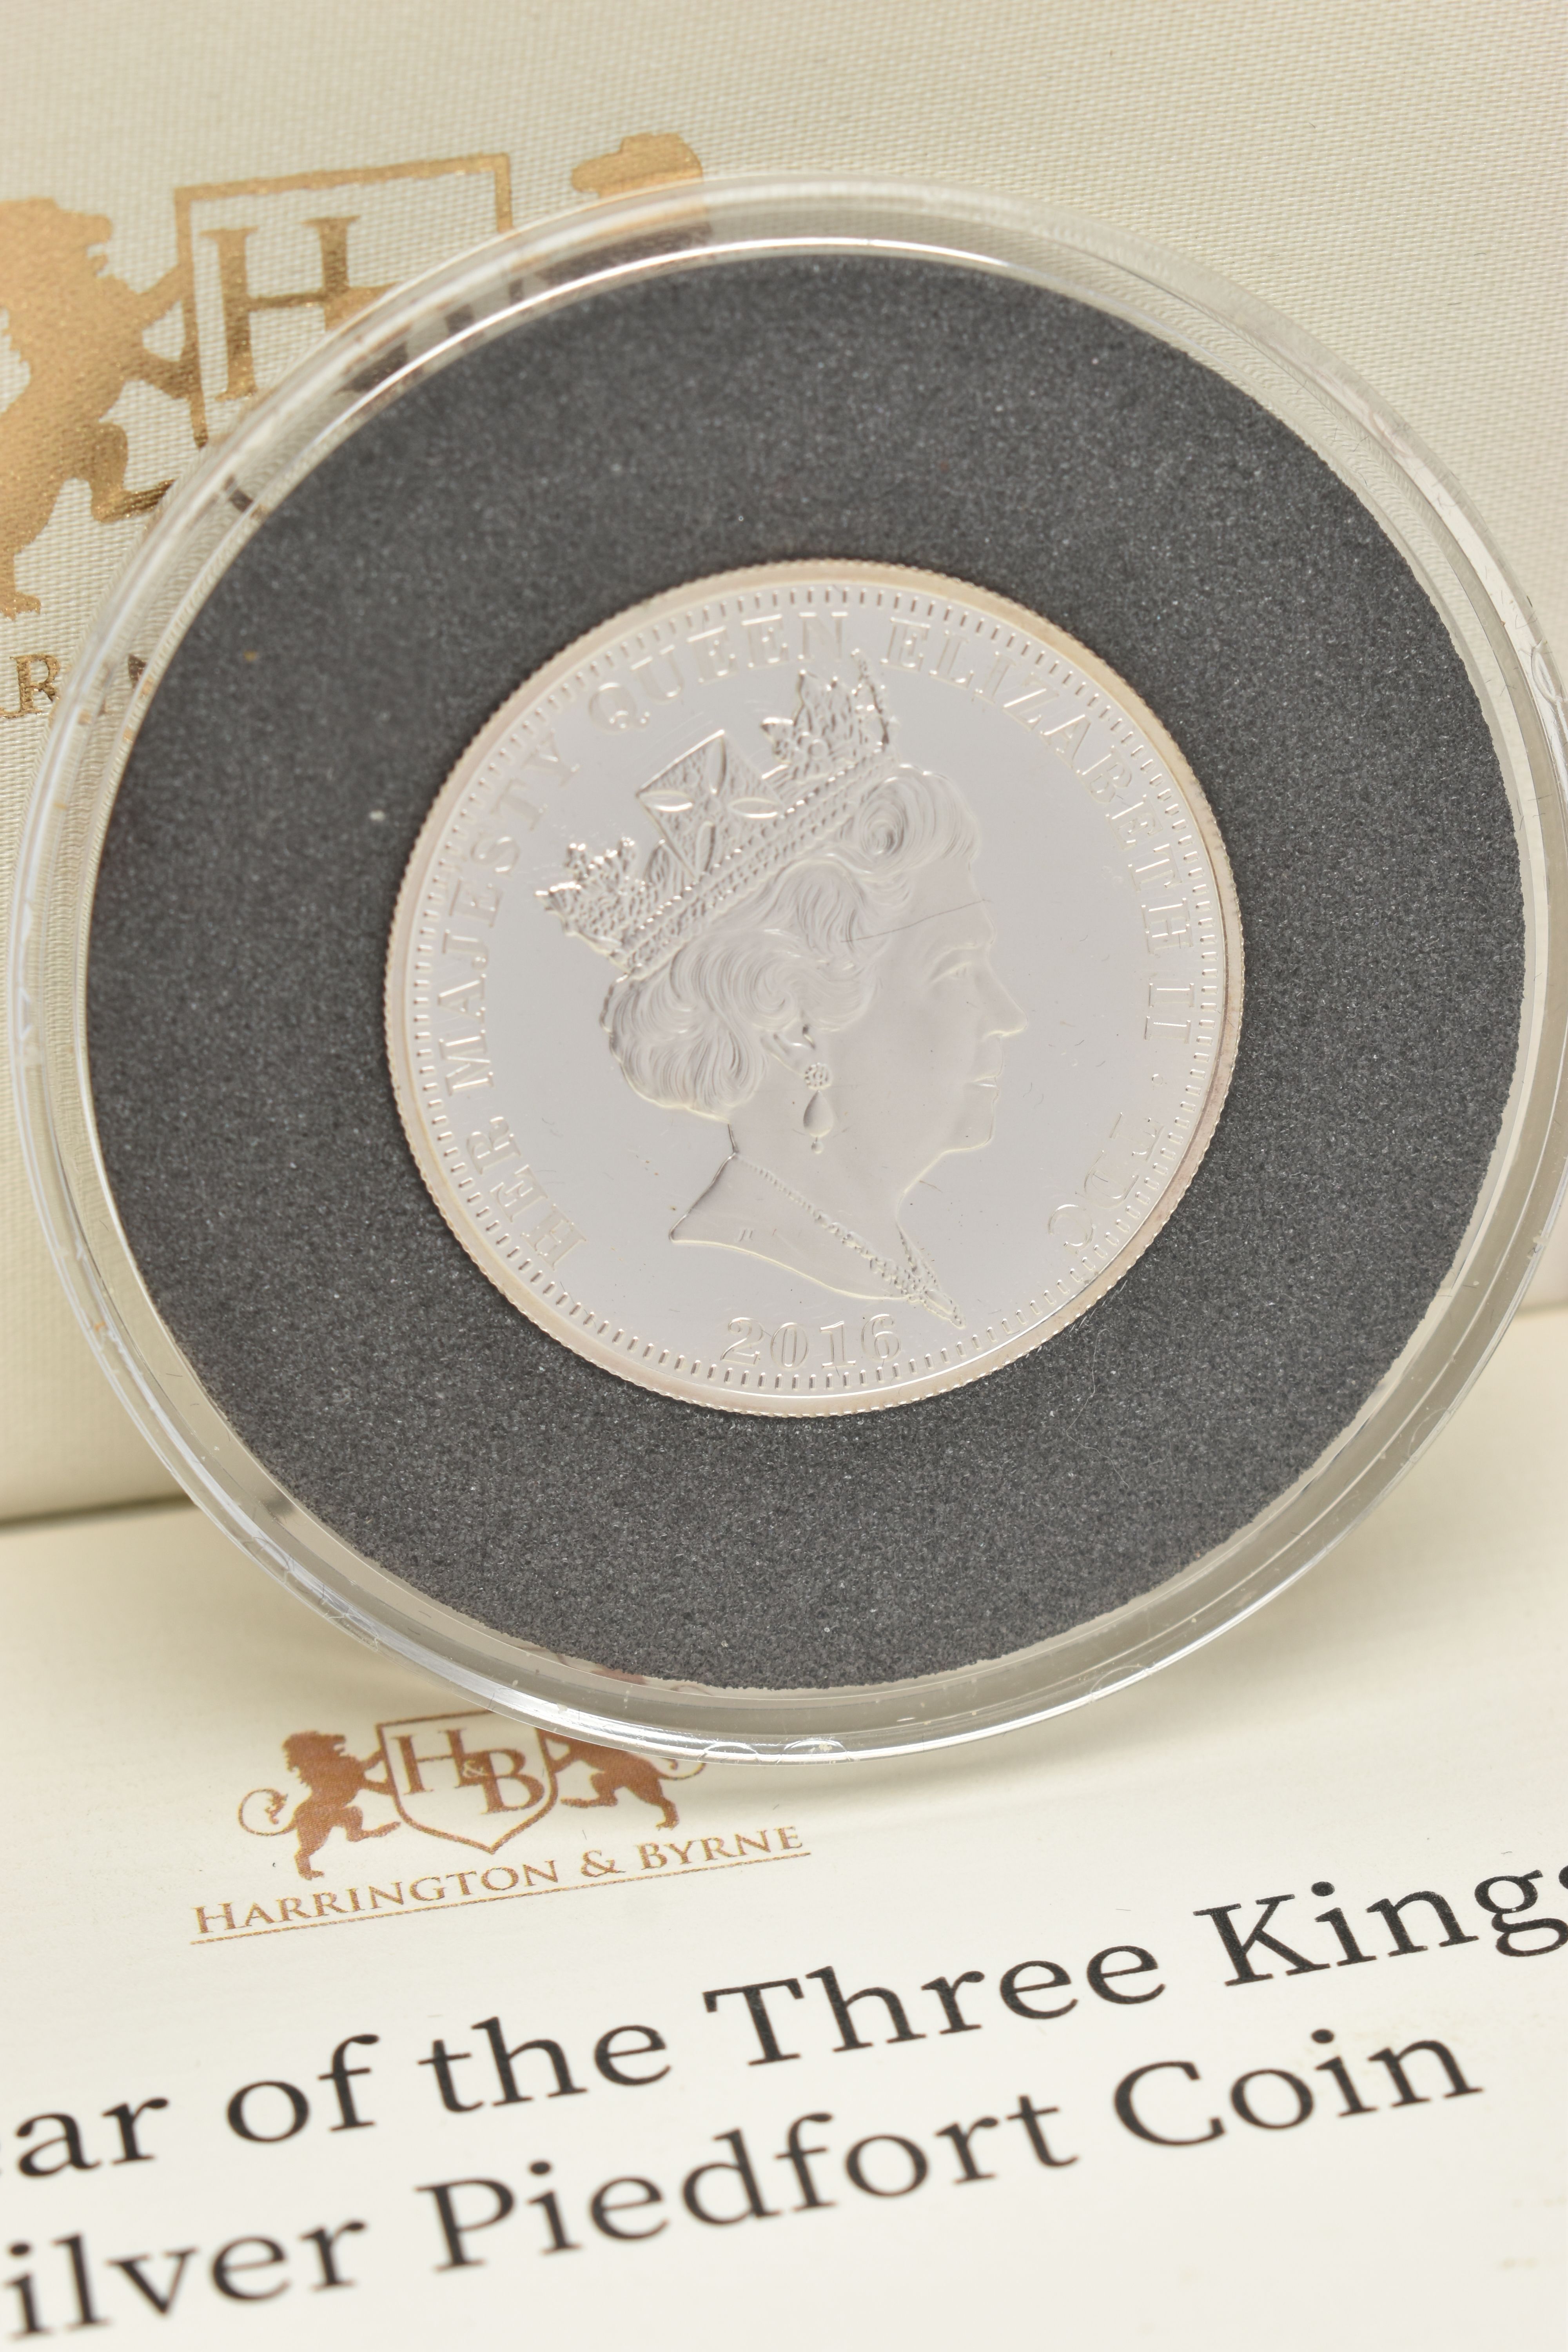 A CASED '2016 YEAR OF THE THREE KINGS £5 SILVER PIEDFORT COIN', 925/1000 silver, Tristan da Cunha, - Image 2 of 3